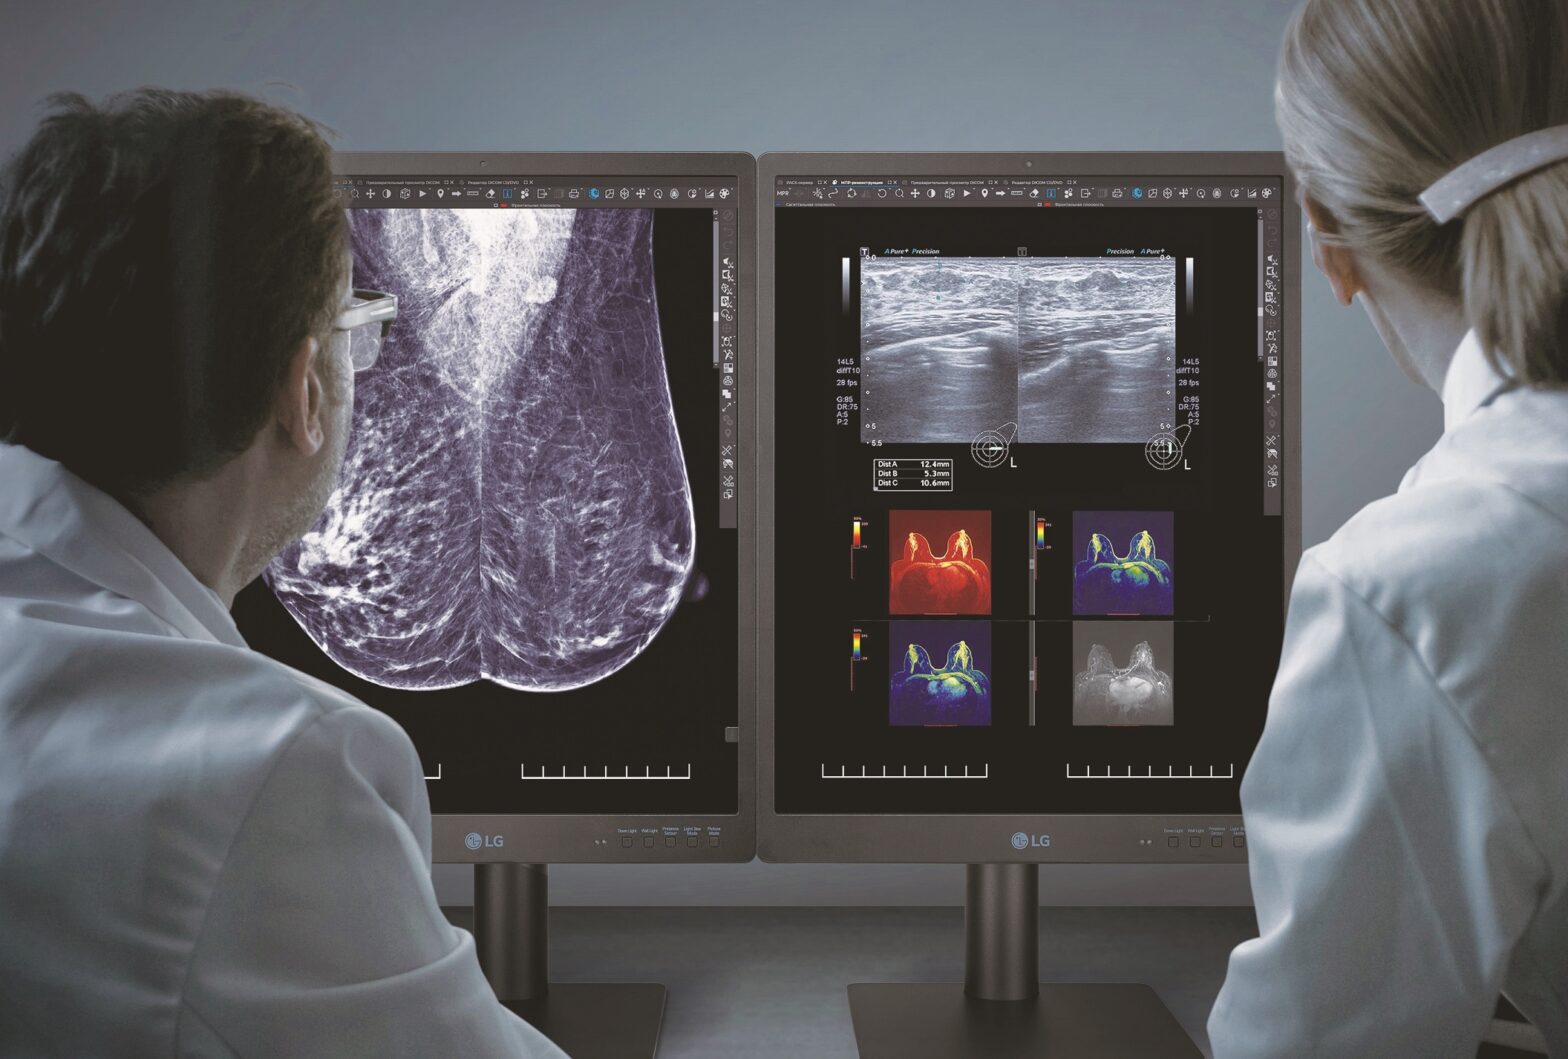 Two doctors looking at images displayed on LG’s diagnostic monitor